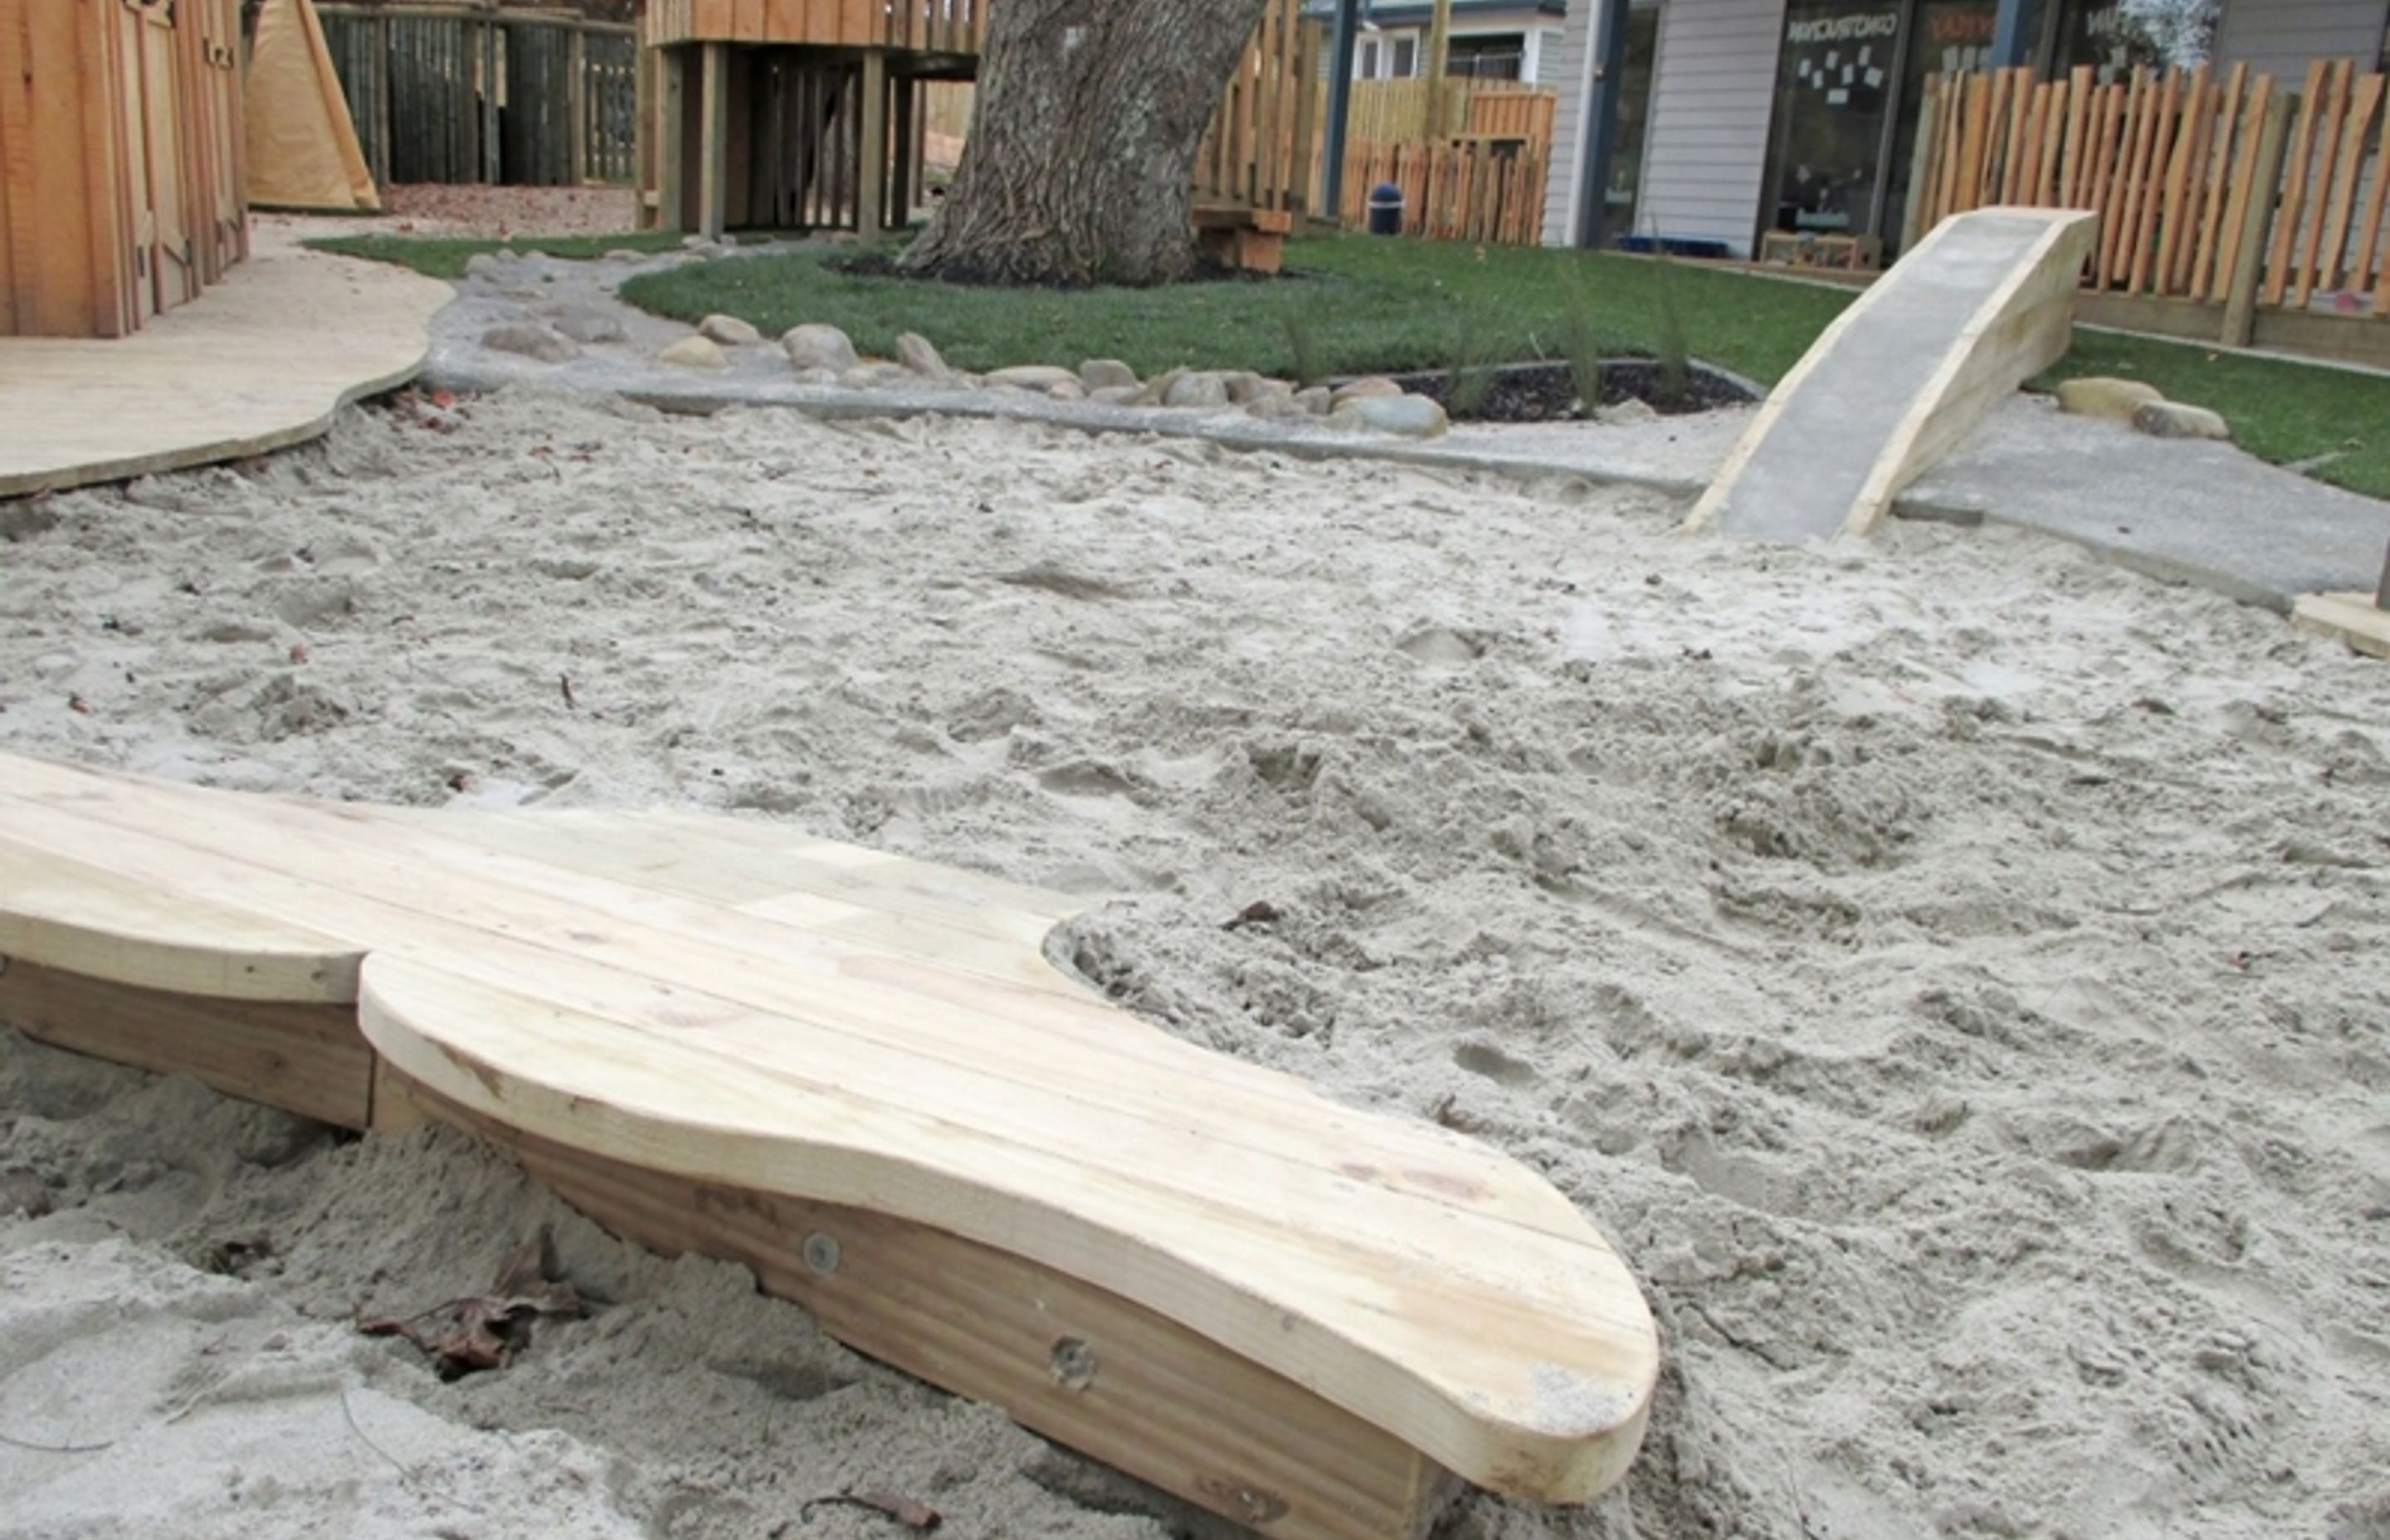 A humpback whale lobbing out the sand pit is a playful nod to Pacifica at Glenbrae Kids centre.